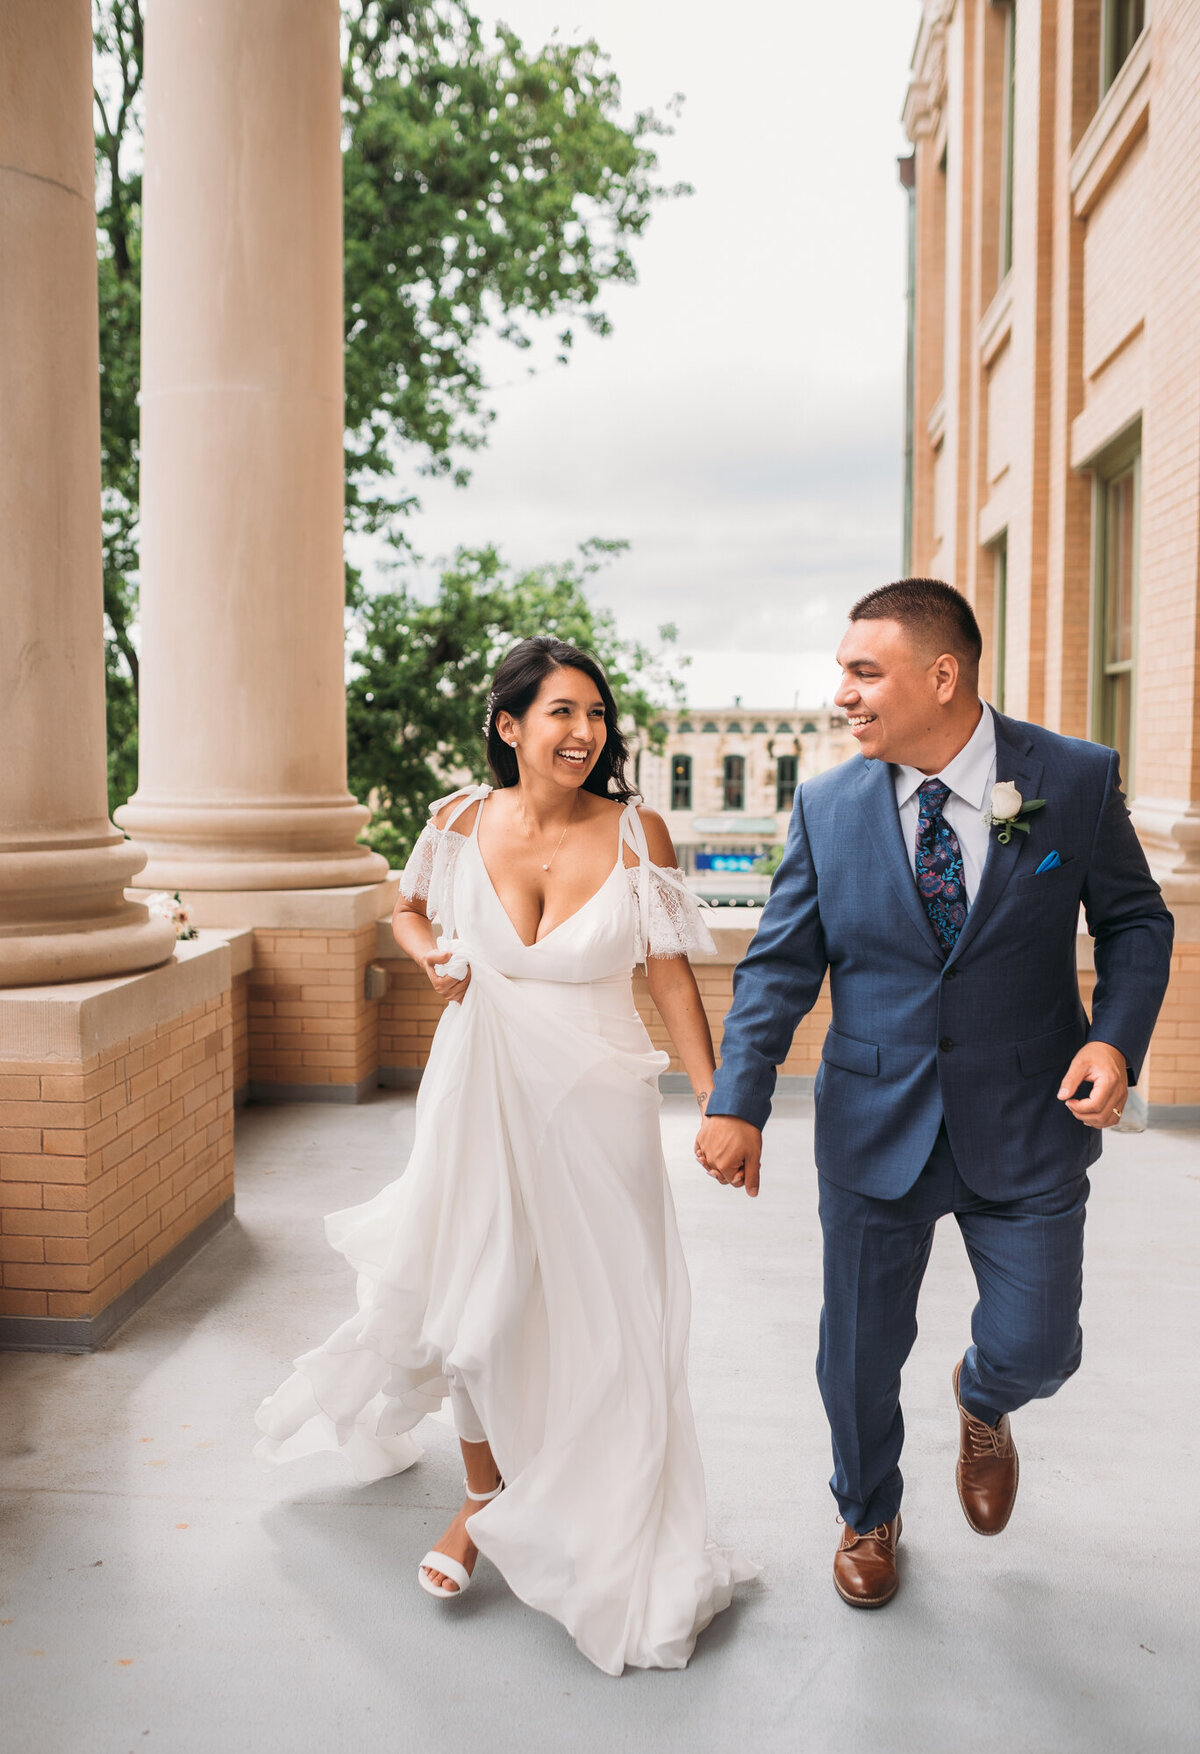 Couples Photography, woman in a  wedding dress is holding hands with man in a  suit, running towards the camera with smiles on their faces.